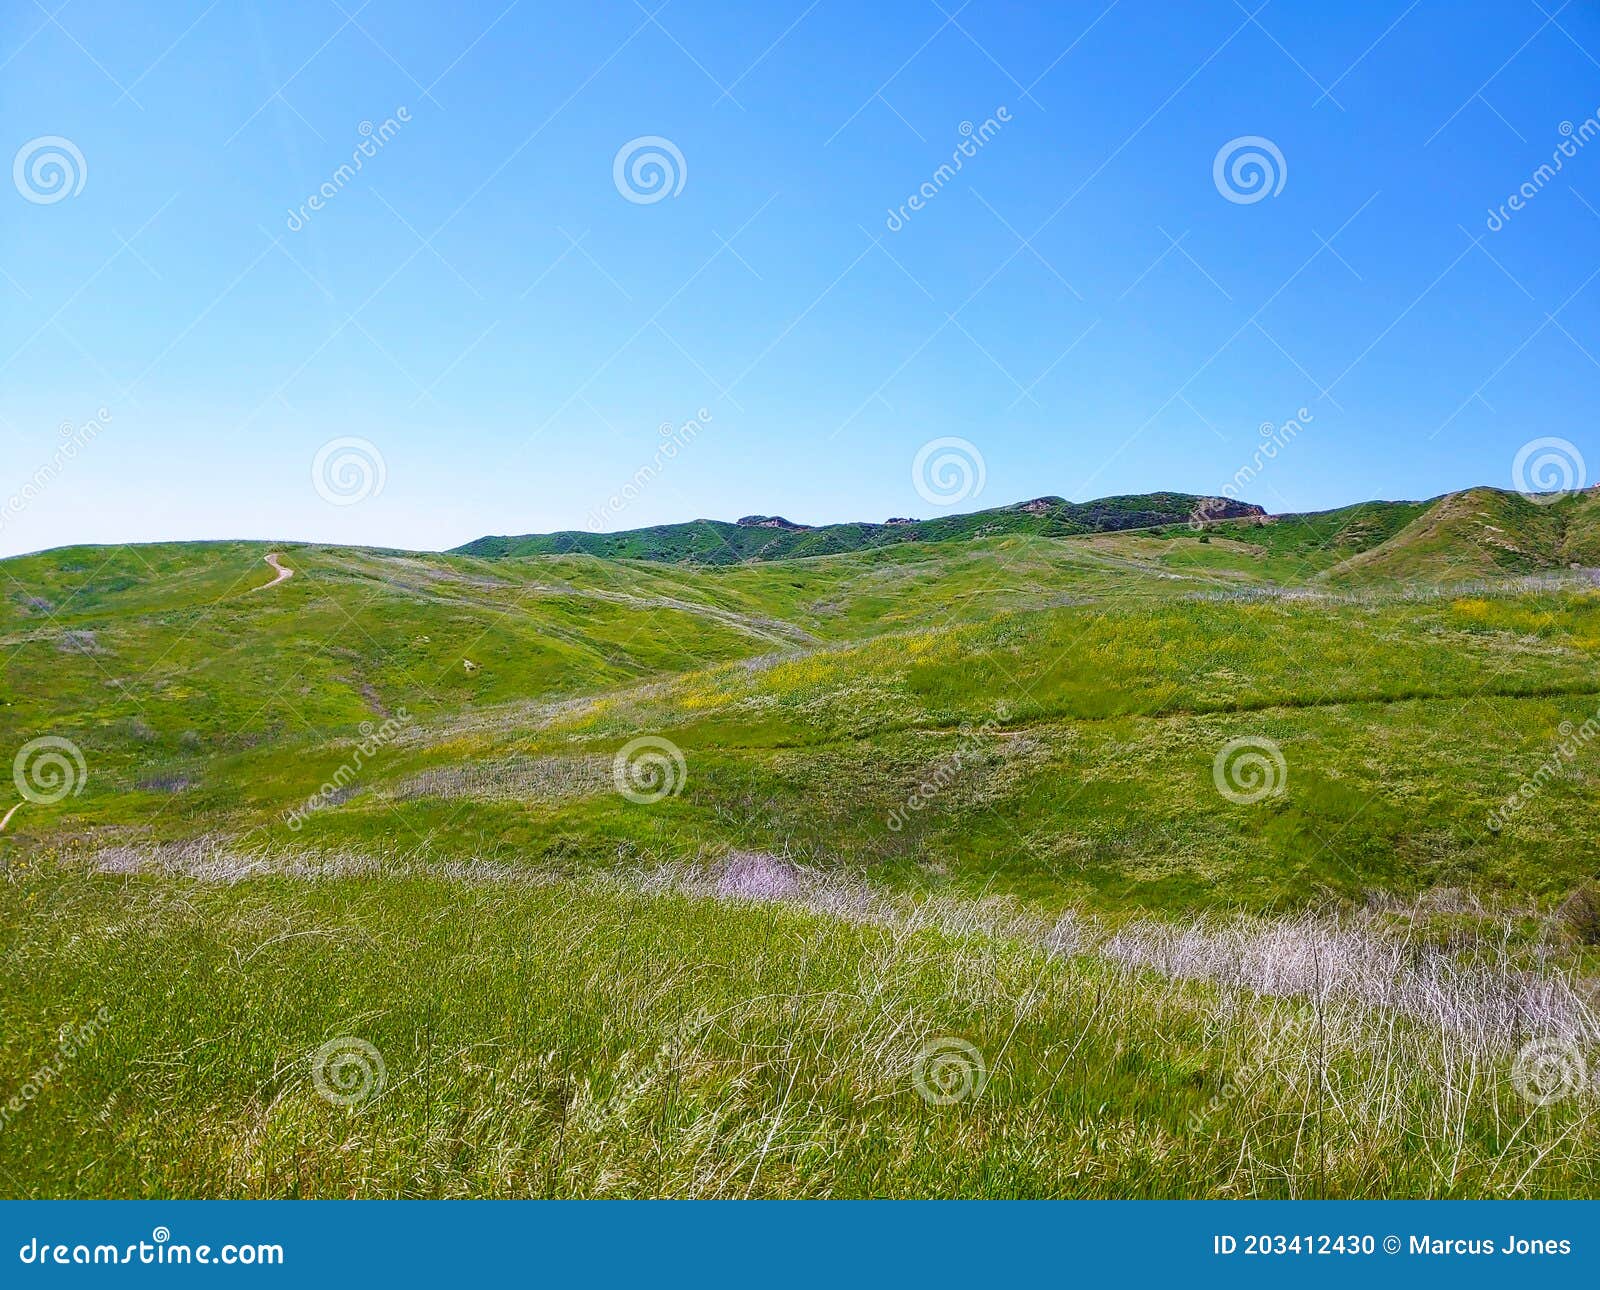 a majestic aerial shot of the lush green hillsides and mountains with a long winding road